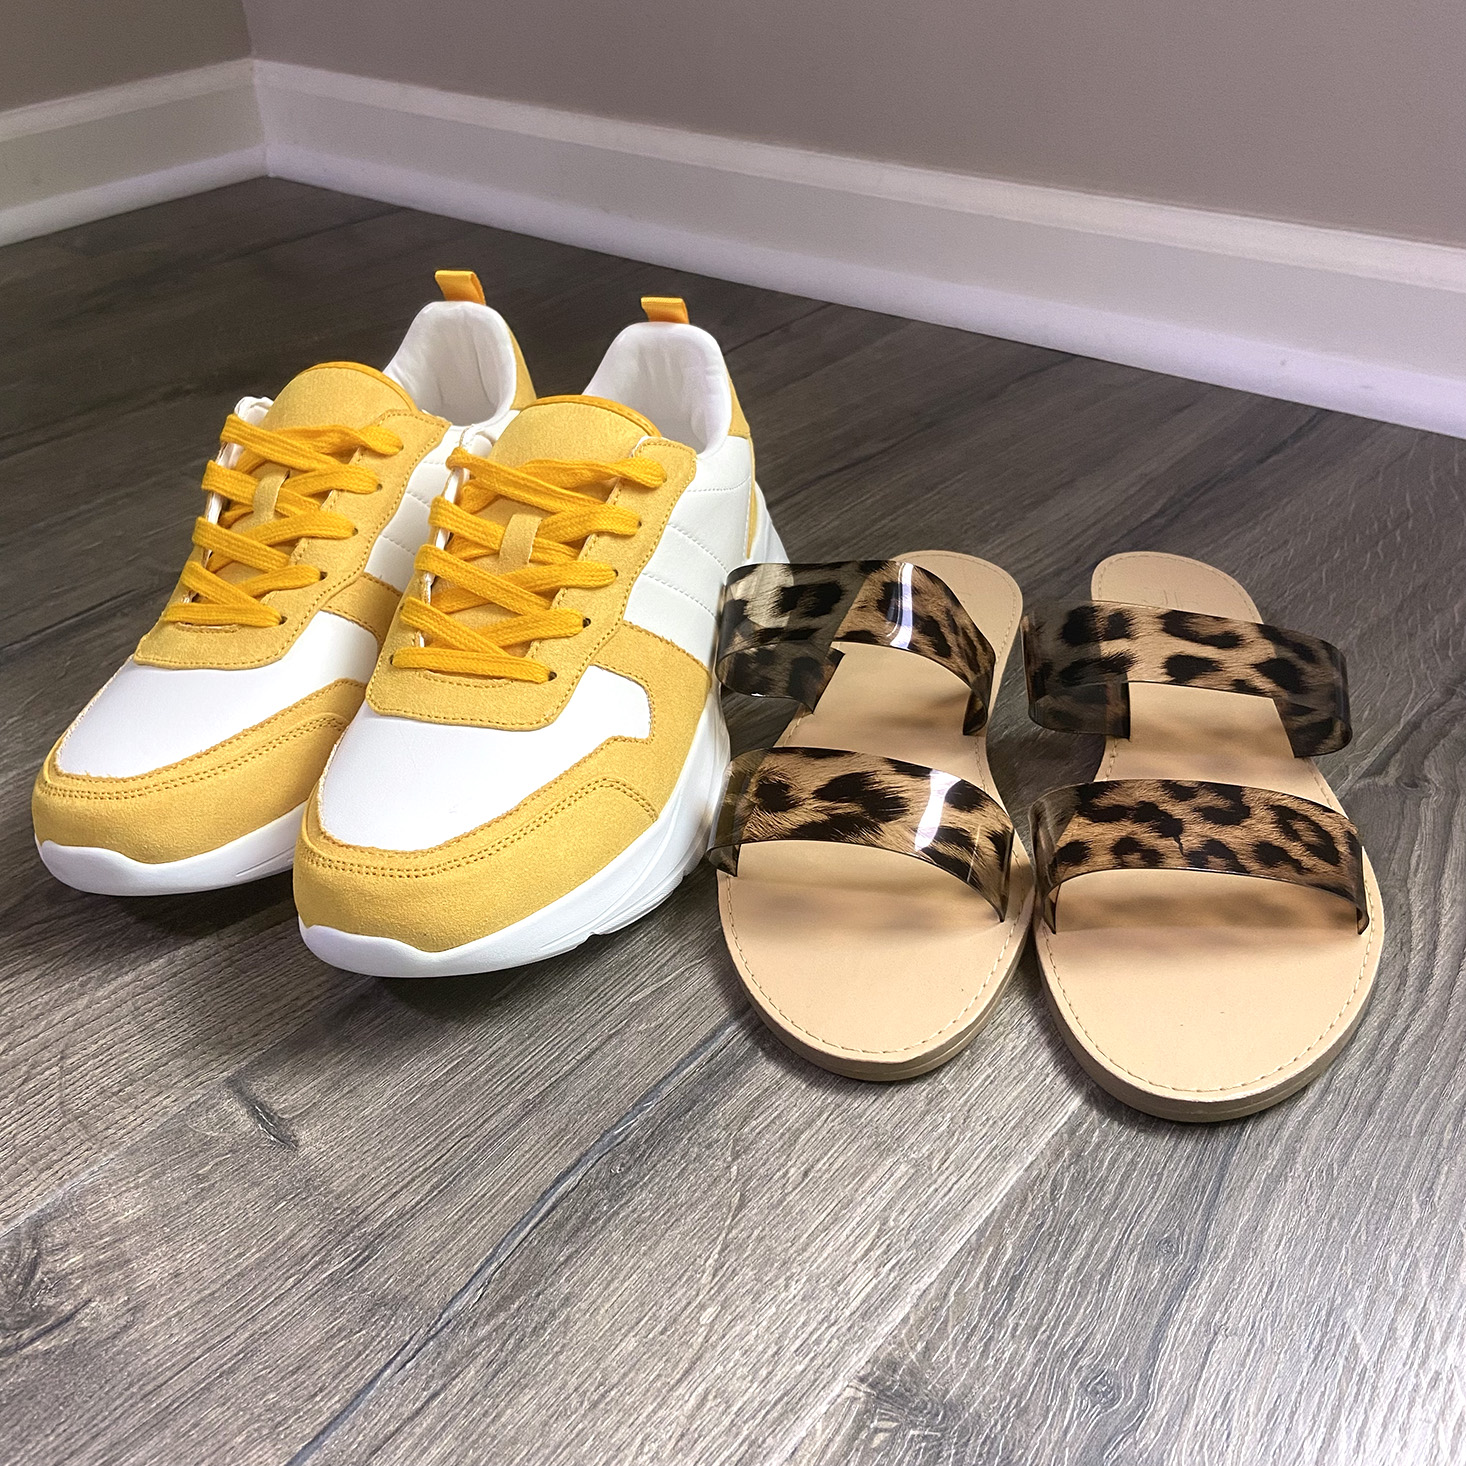 JustFab April 2022 Review + First Look for $10 Coupon